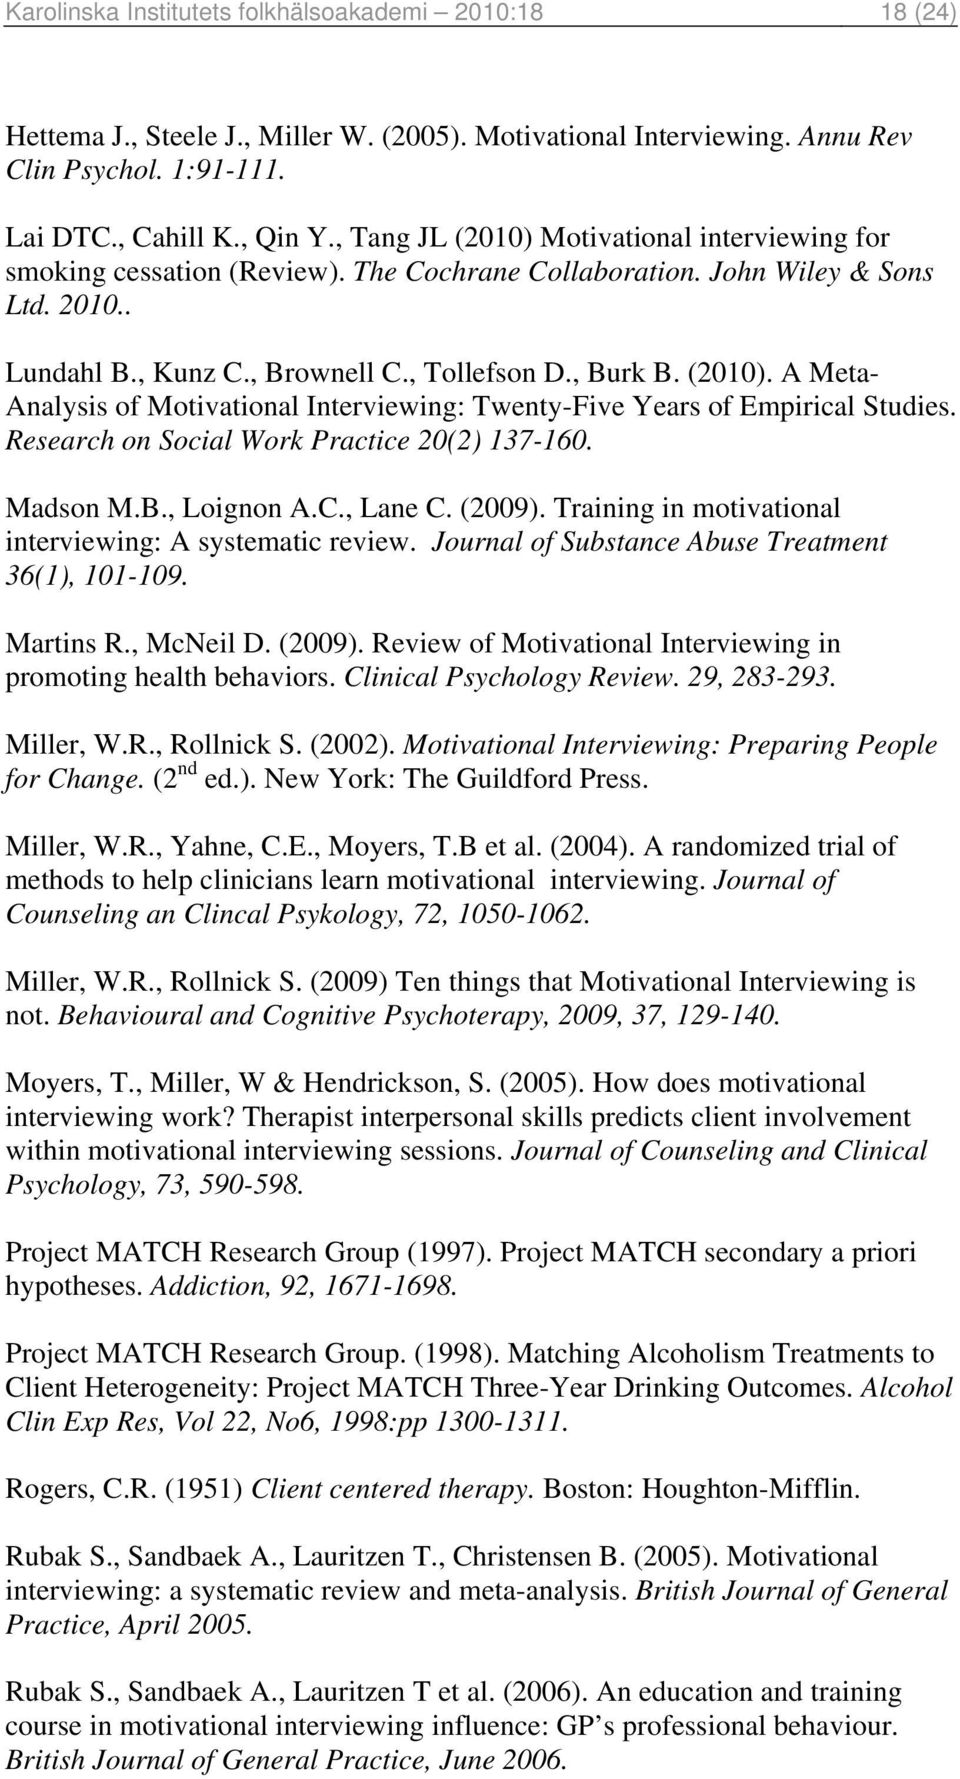 Research on Social Work Practice 20(2) 137-160. Madson M.B., Loignon A.C., Lane C. (2009). Training in motivational interviewing: A systematic review.